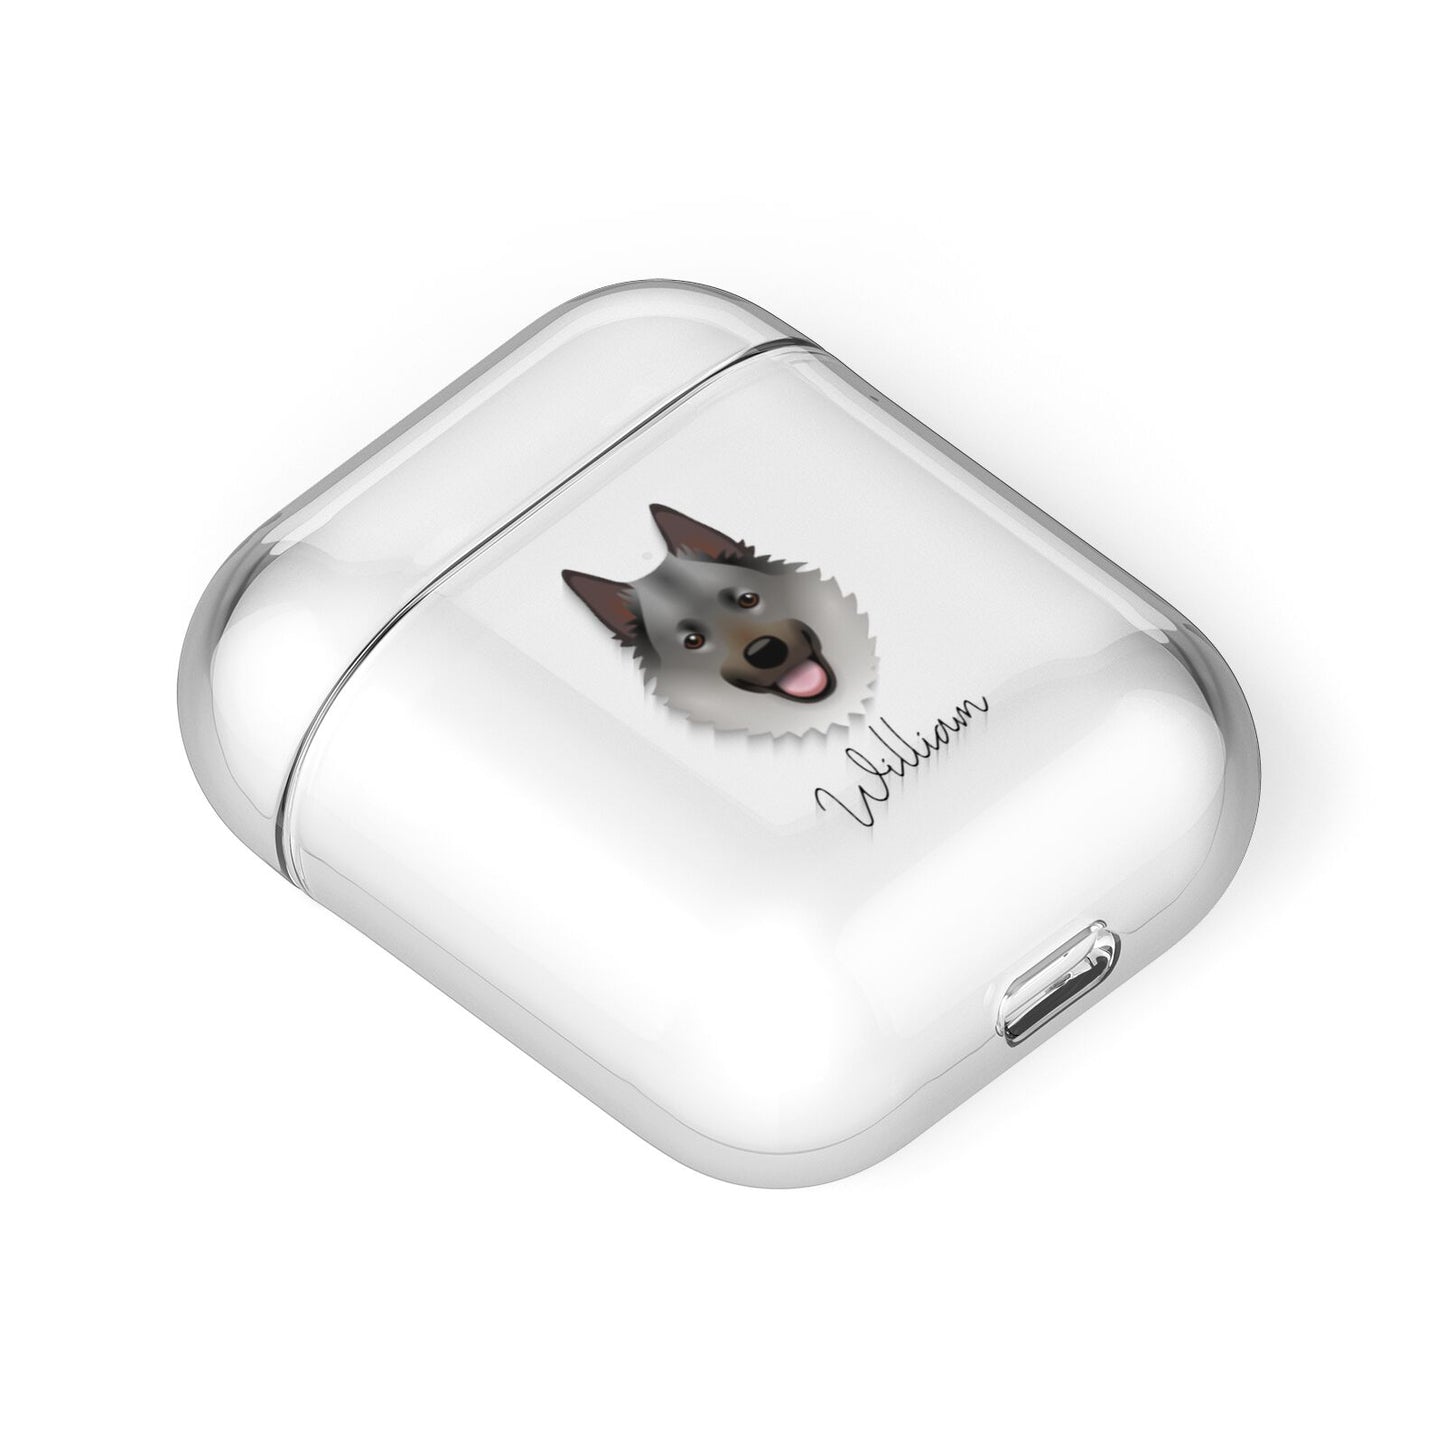 Norwegian Elkhound Personalised AirPods Case Laid Flat